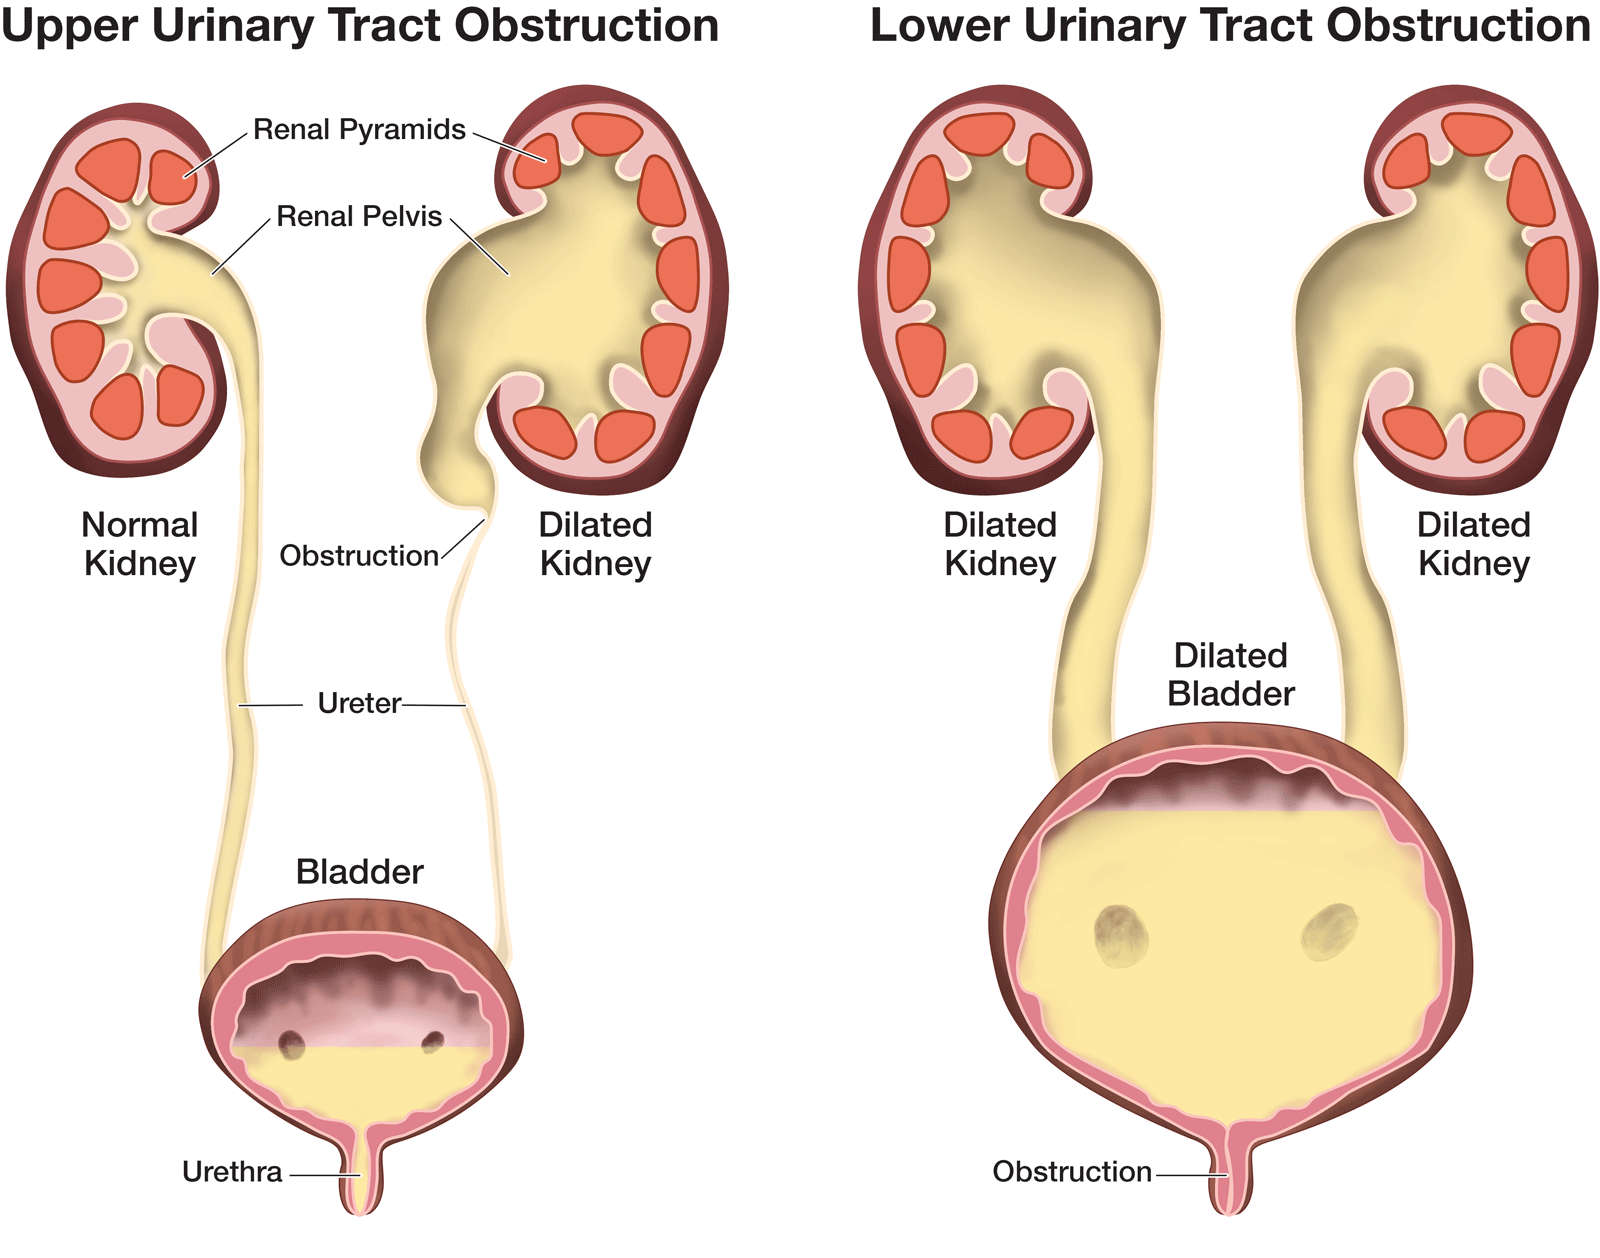 illustration of upper and lower urinary tract obstruction